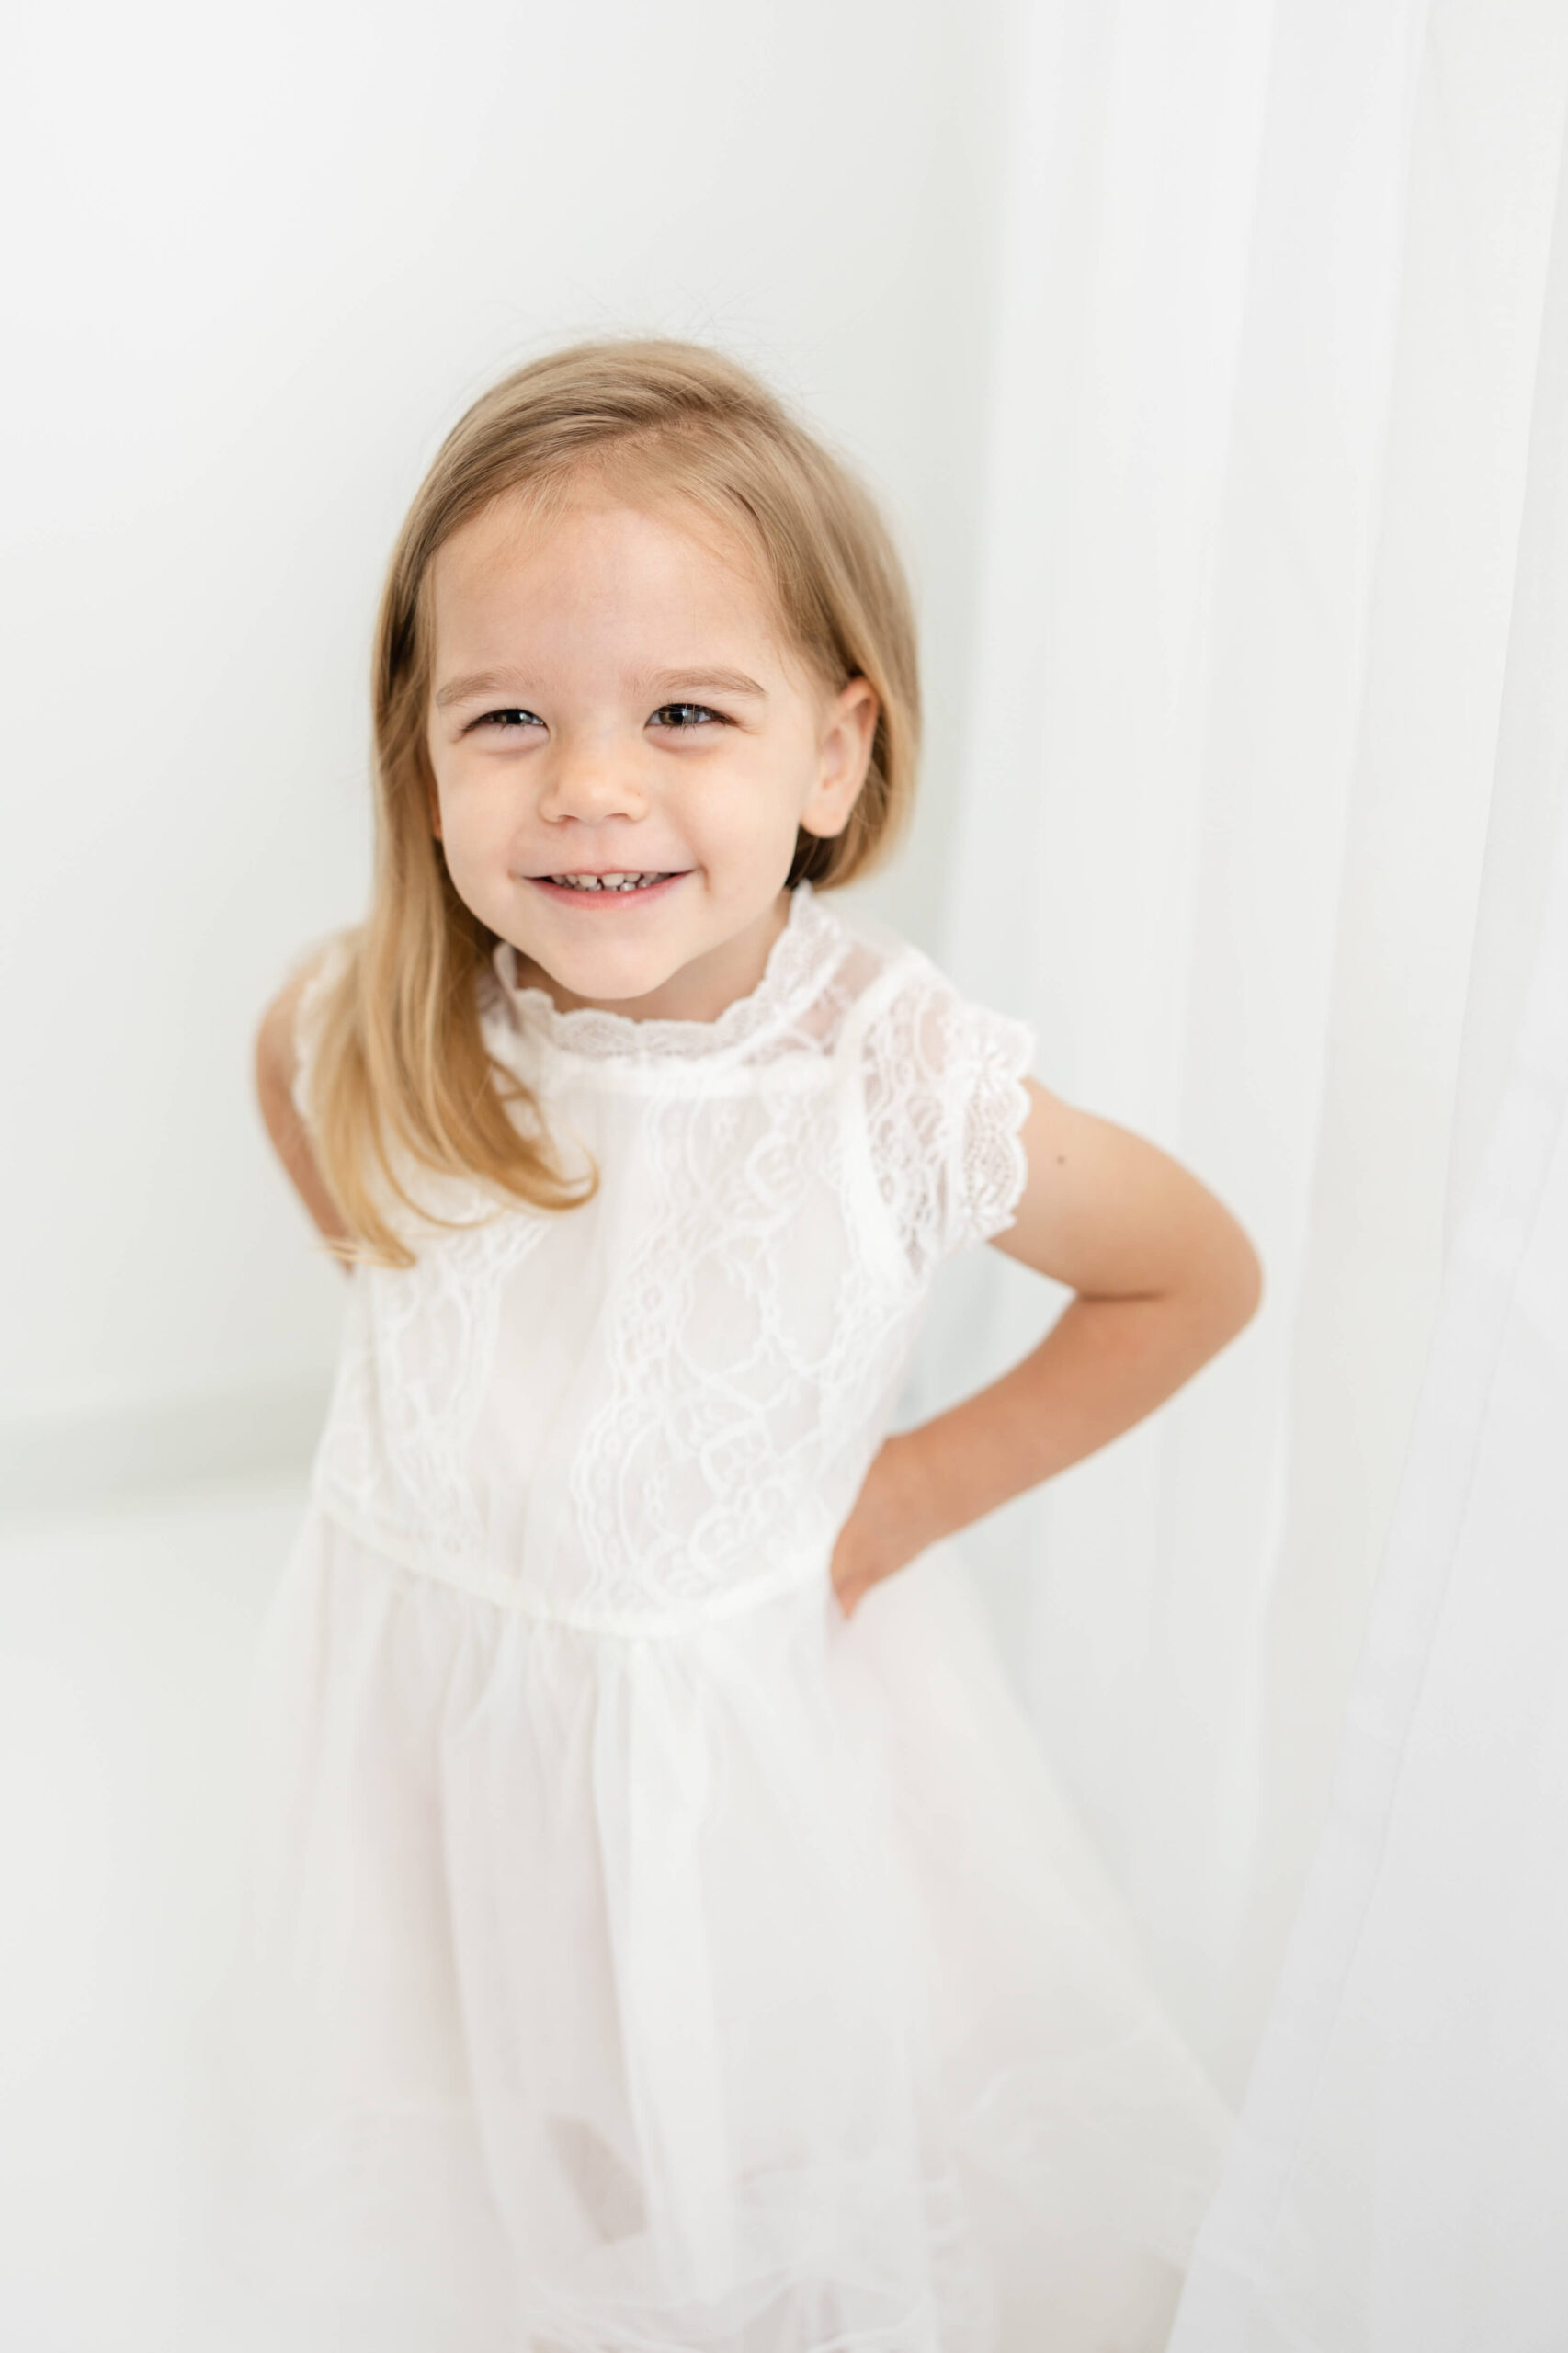 Captured beautiful 2 year old during child portrait session with Molly Berry Photography.